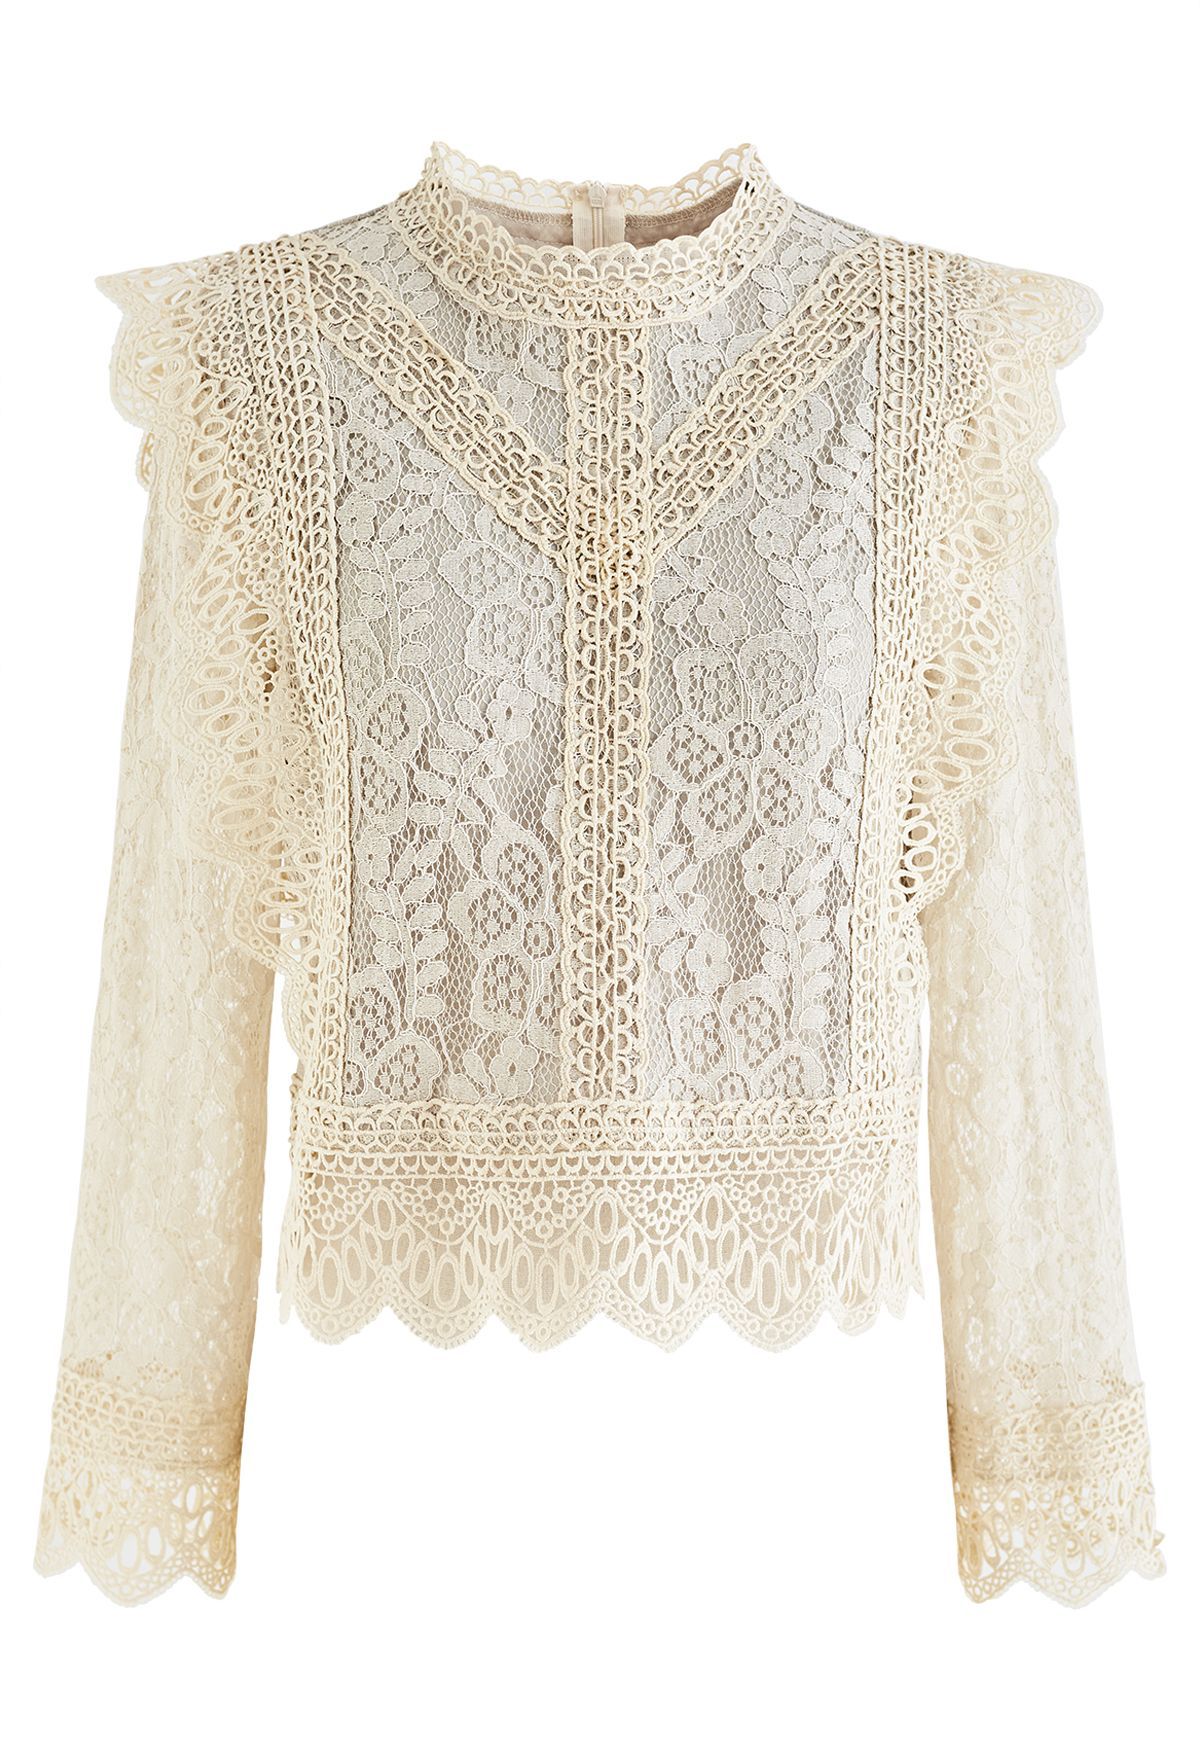 Your Sassy Start Long Sleeve Crochet Lace Top in Cream | Chicwish